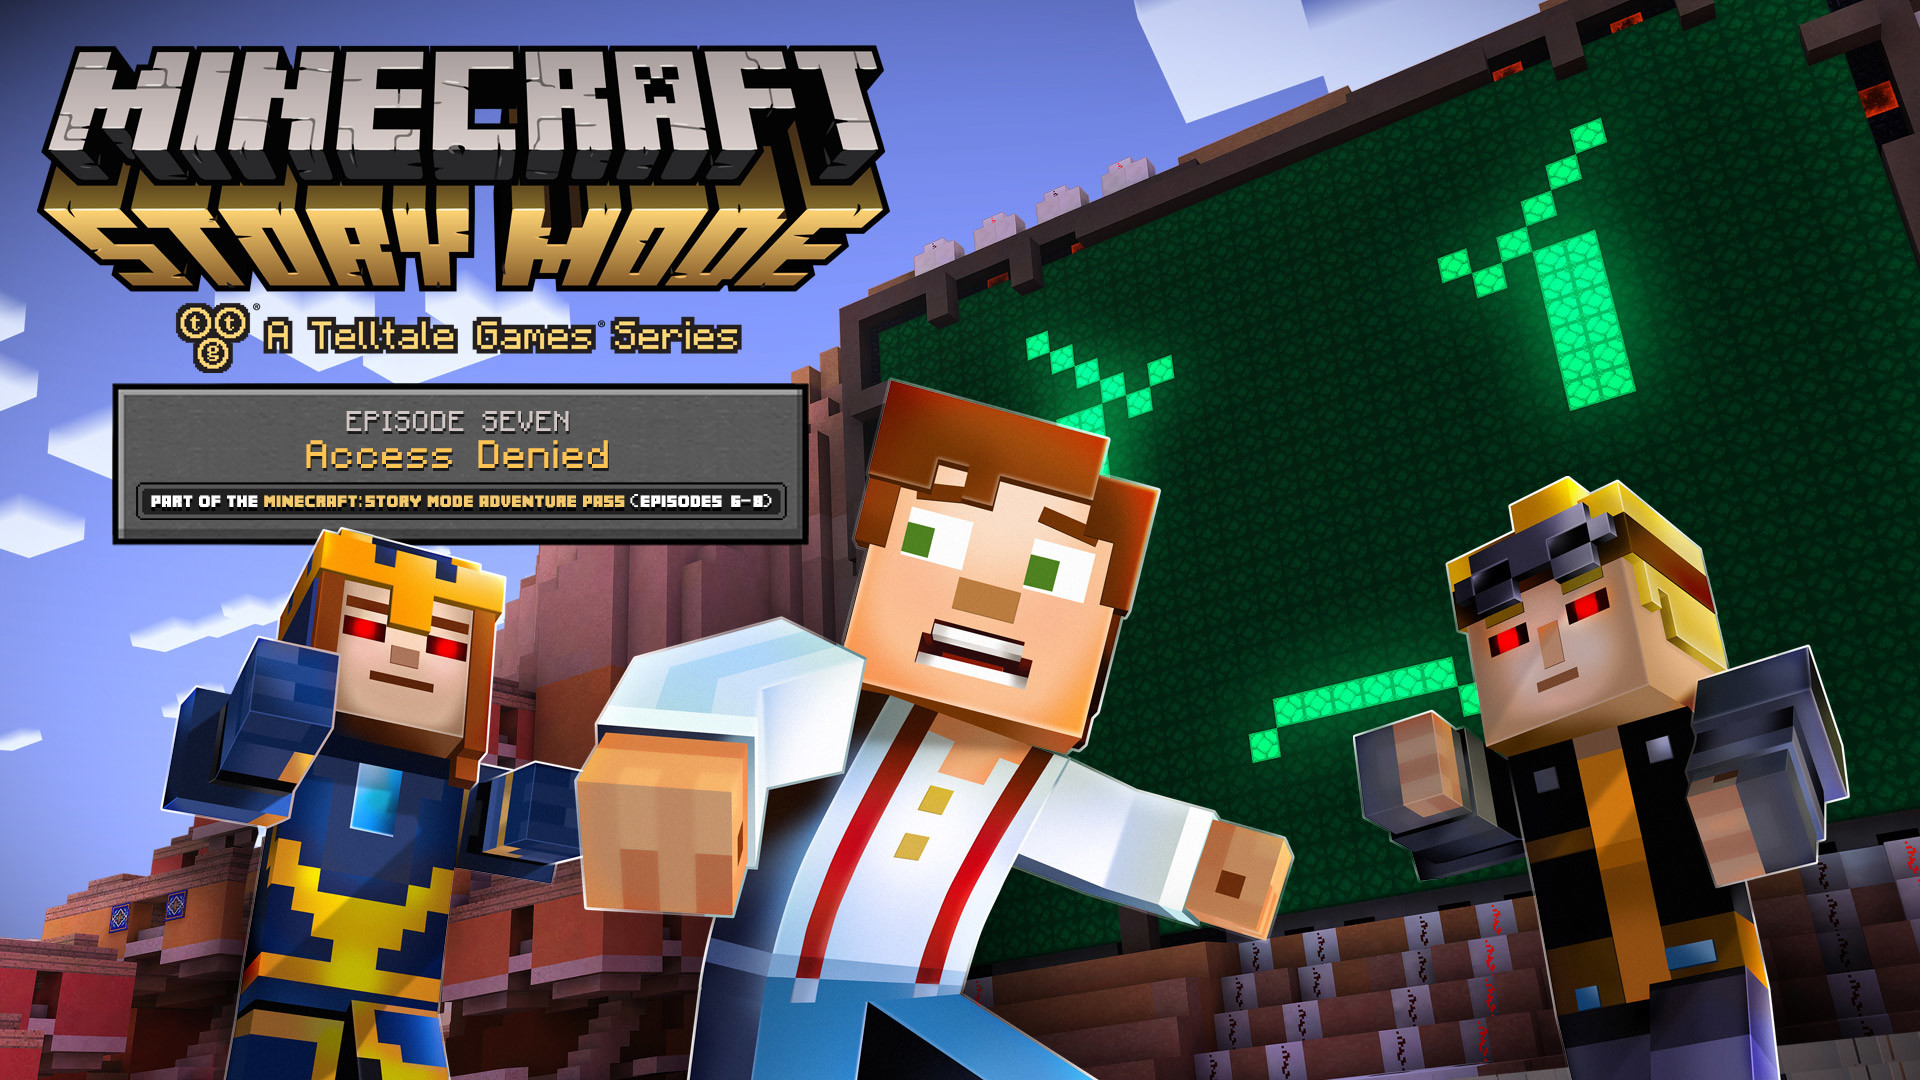 1920x1080 Free Minecraft: Story Mode Wallpaper in 